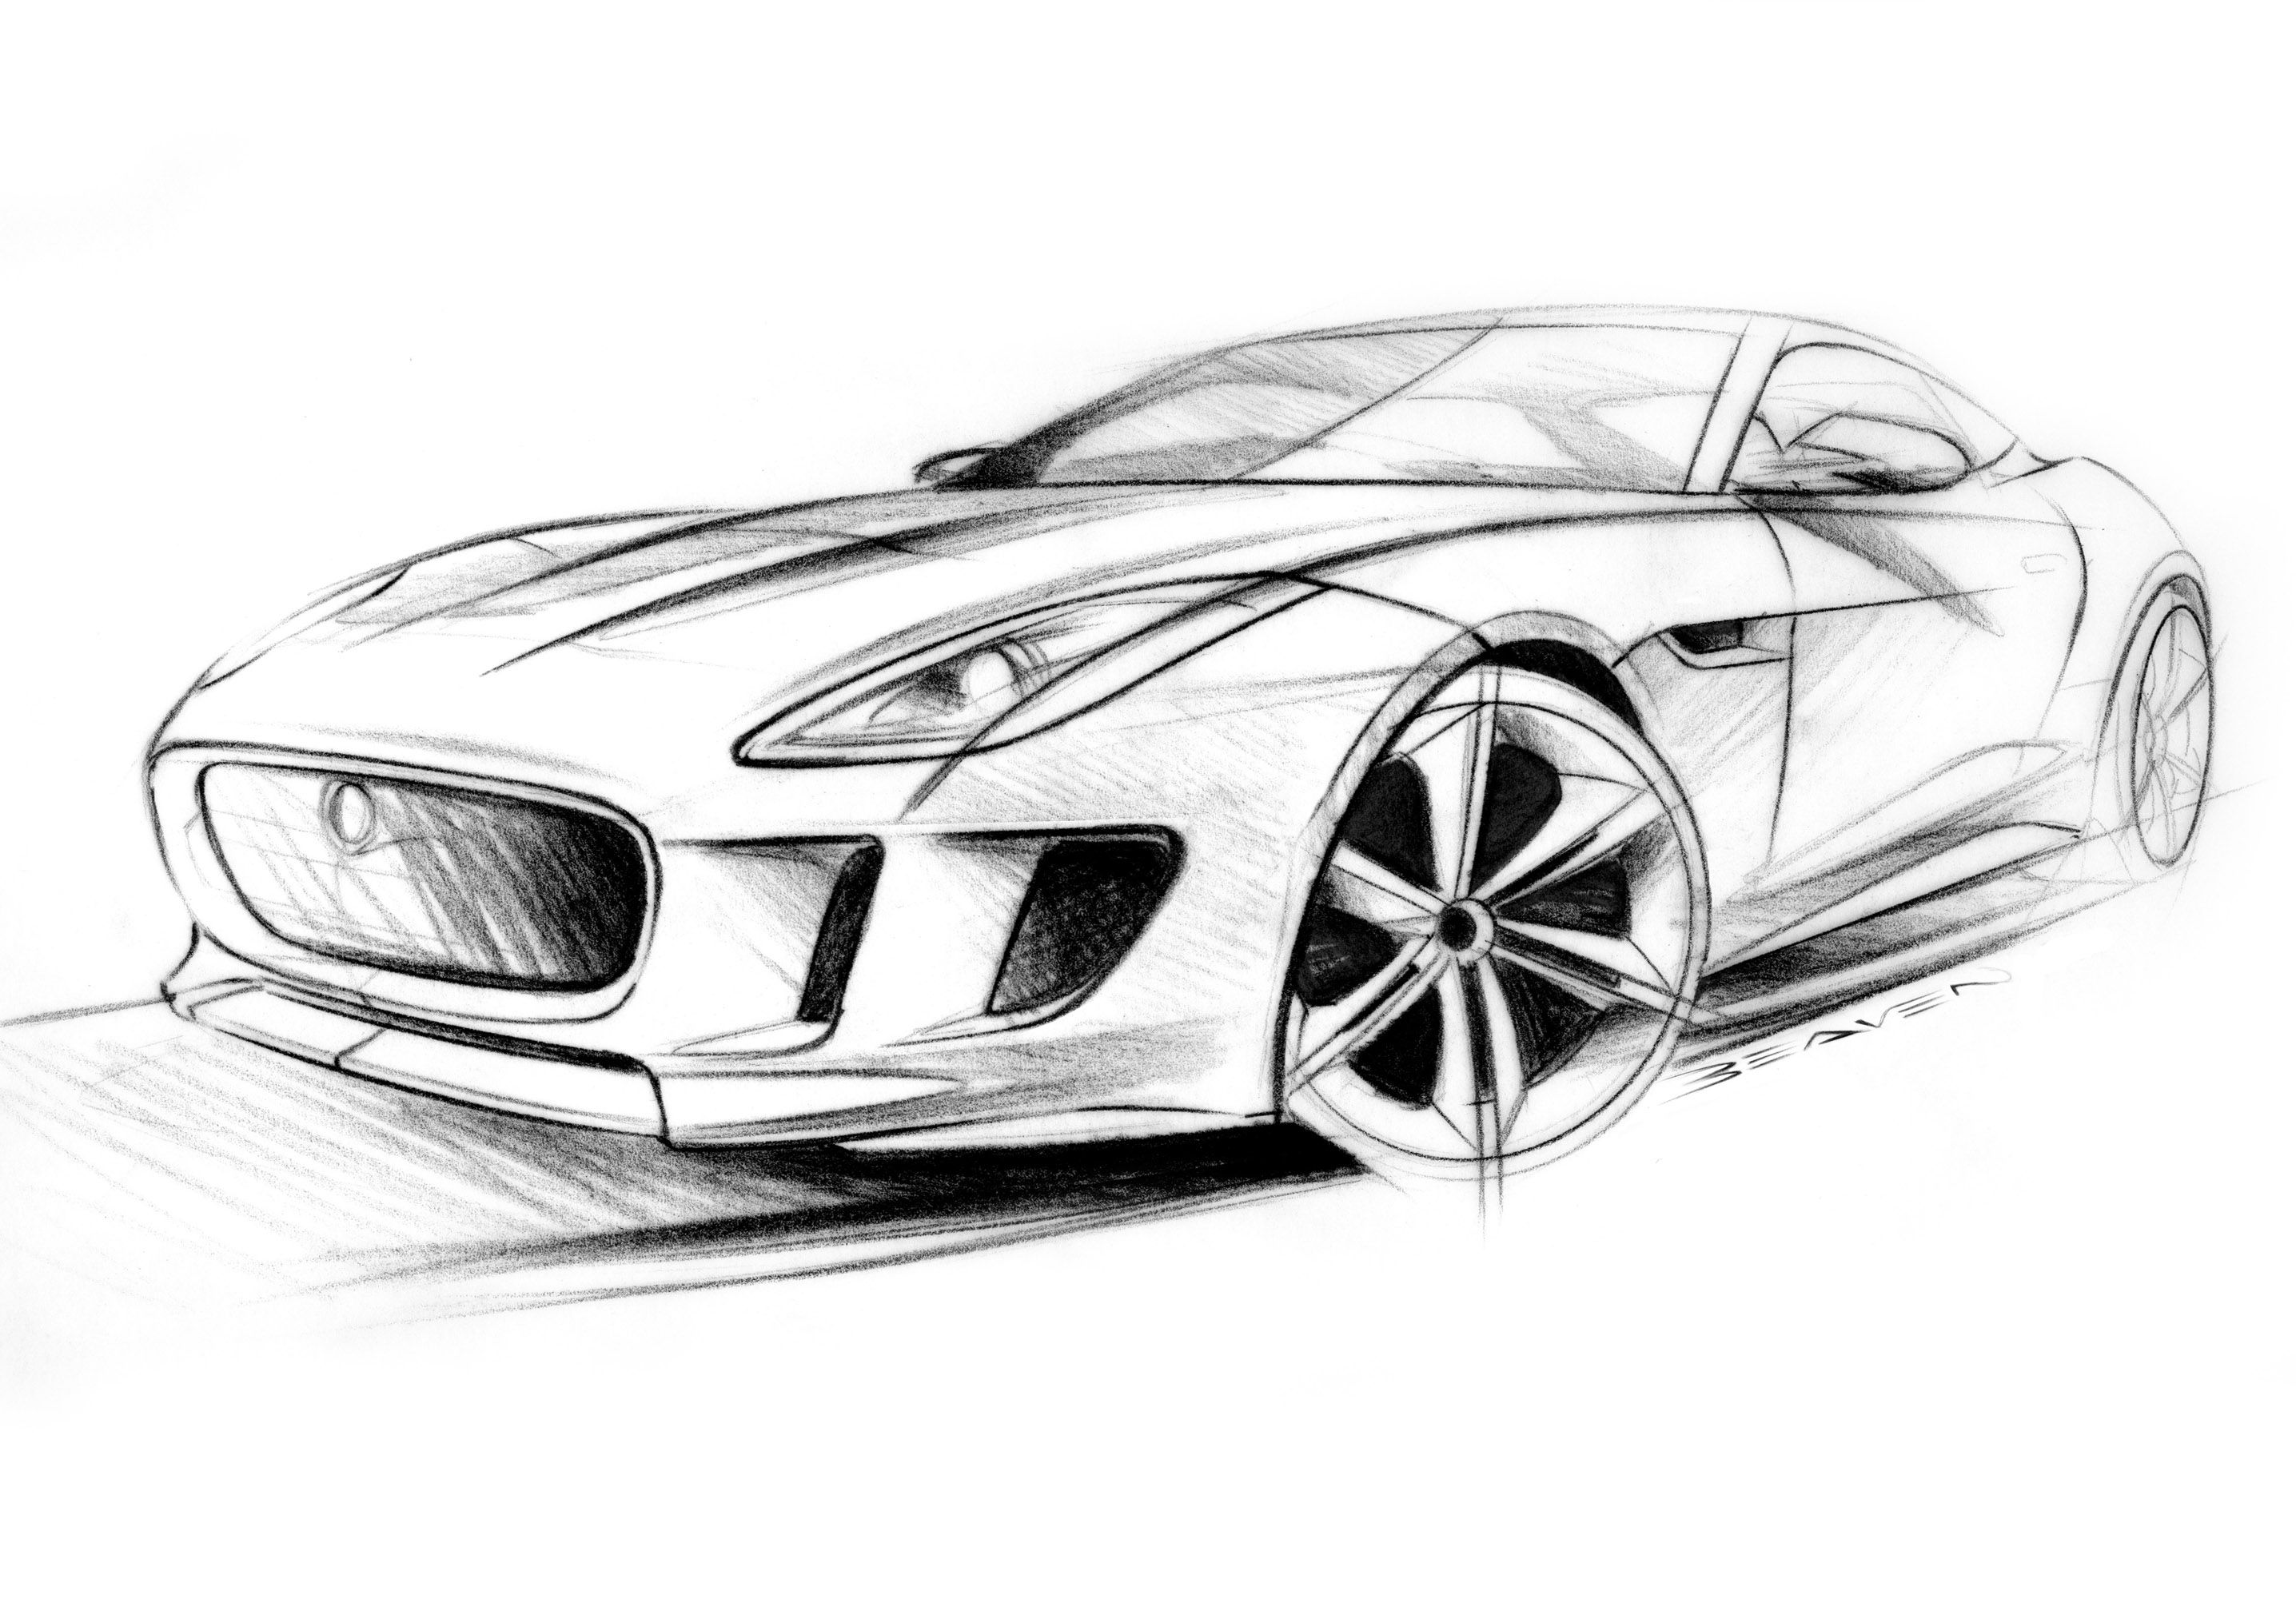 Amazon.com: Sports Cars Coloring Book: A Collection of 45 Cool Supercars |  Relaxation Coloring Pages for Kids, Adults, Boys, and Car Lovers:  9798698647614: Lance Derrick: Books